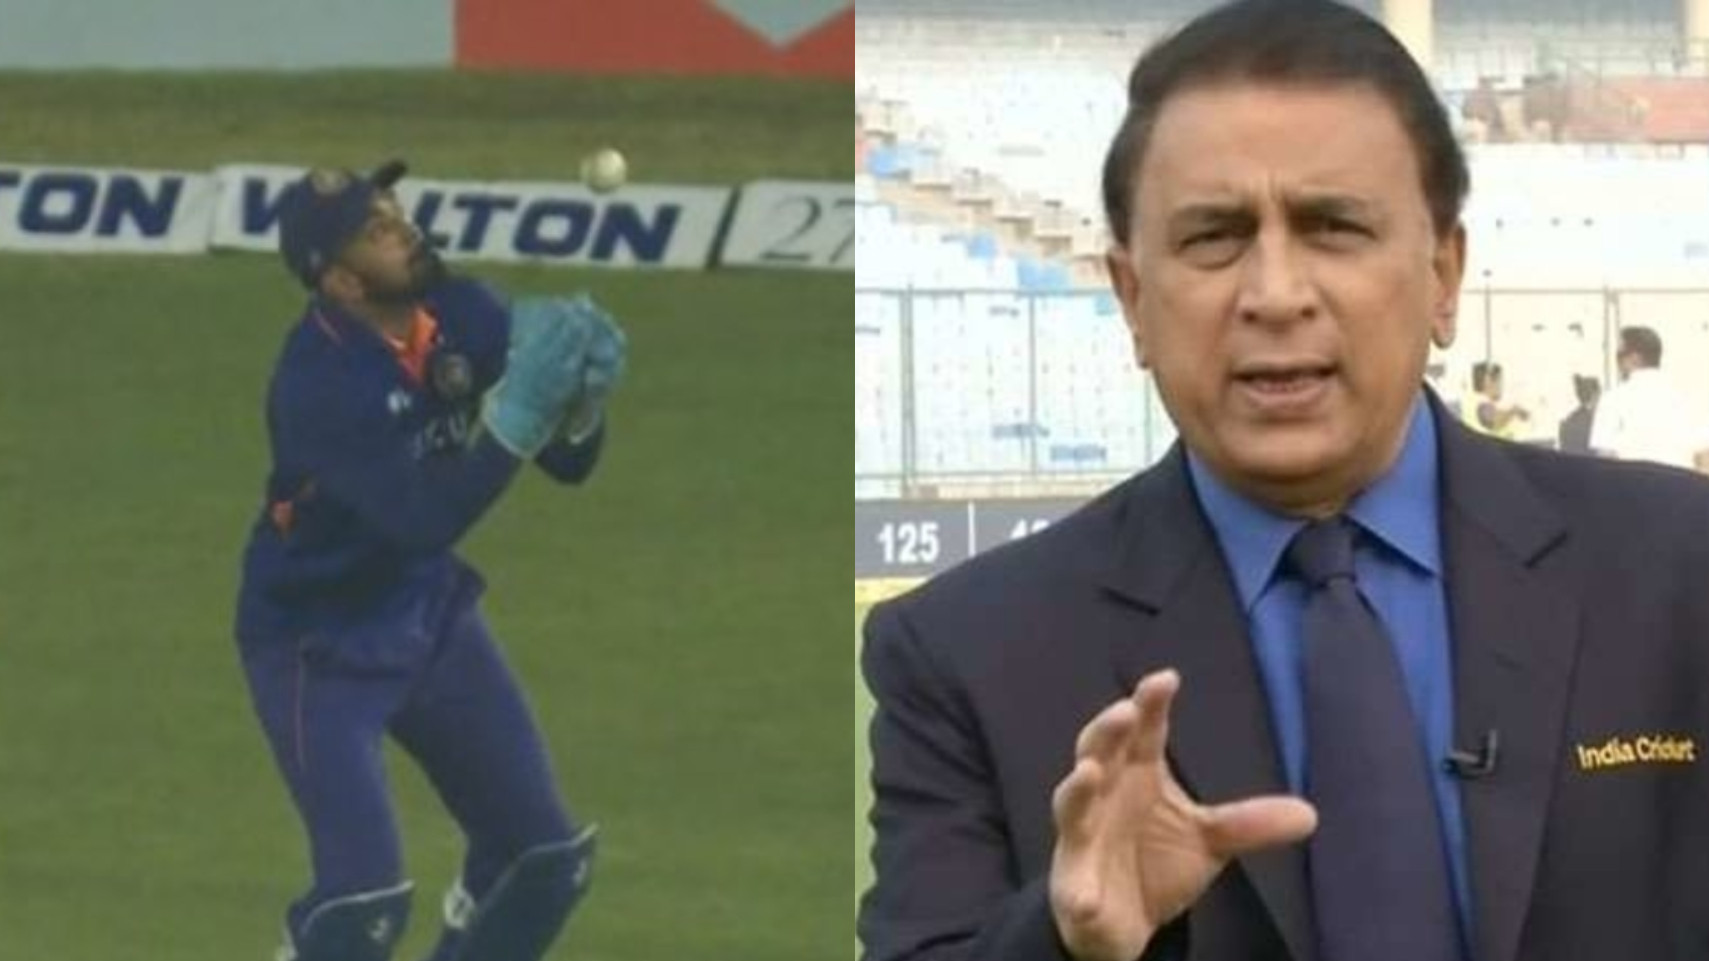 BAN v IND 2022: ‘You can’t really say that was it’- Gavaskar defends KL Rahul’s drop catch, says India were 70-80 runs short